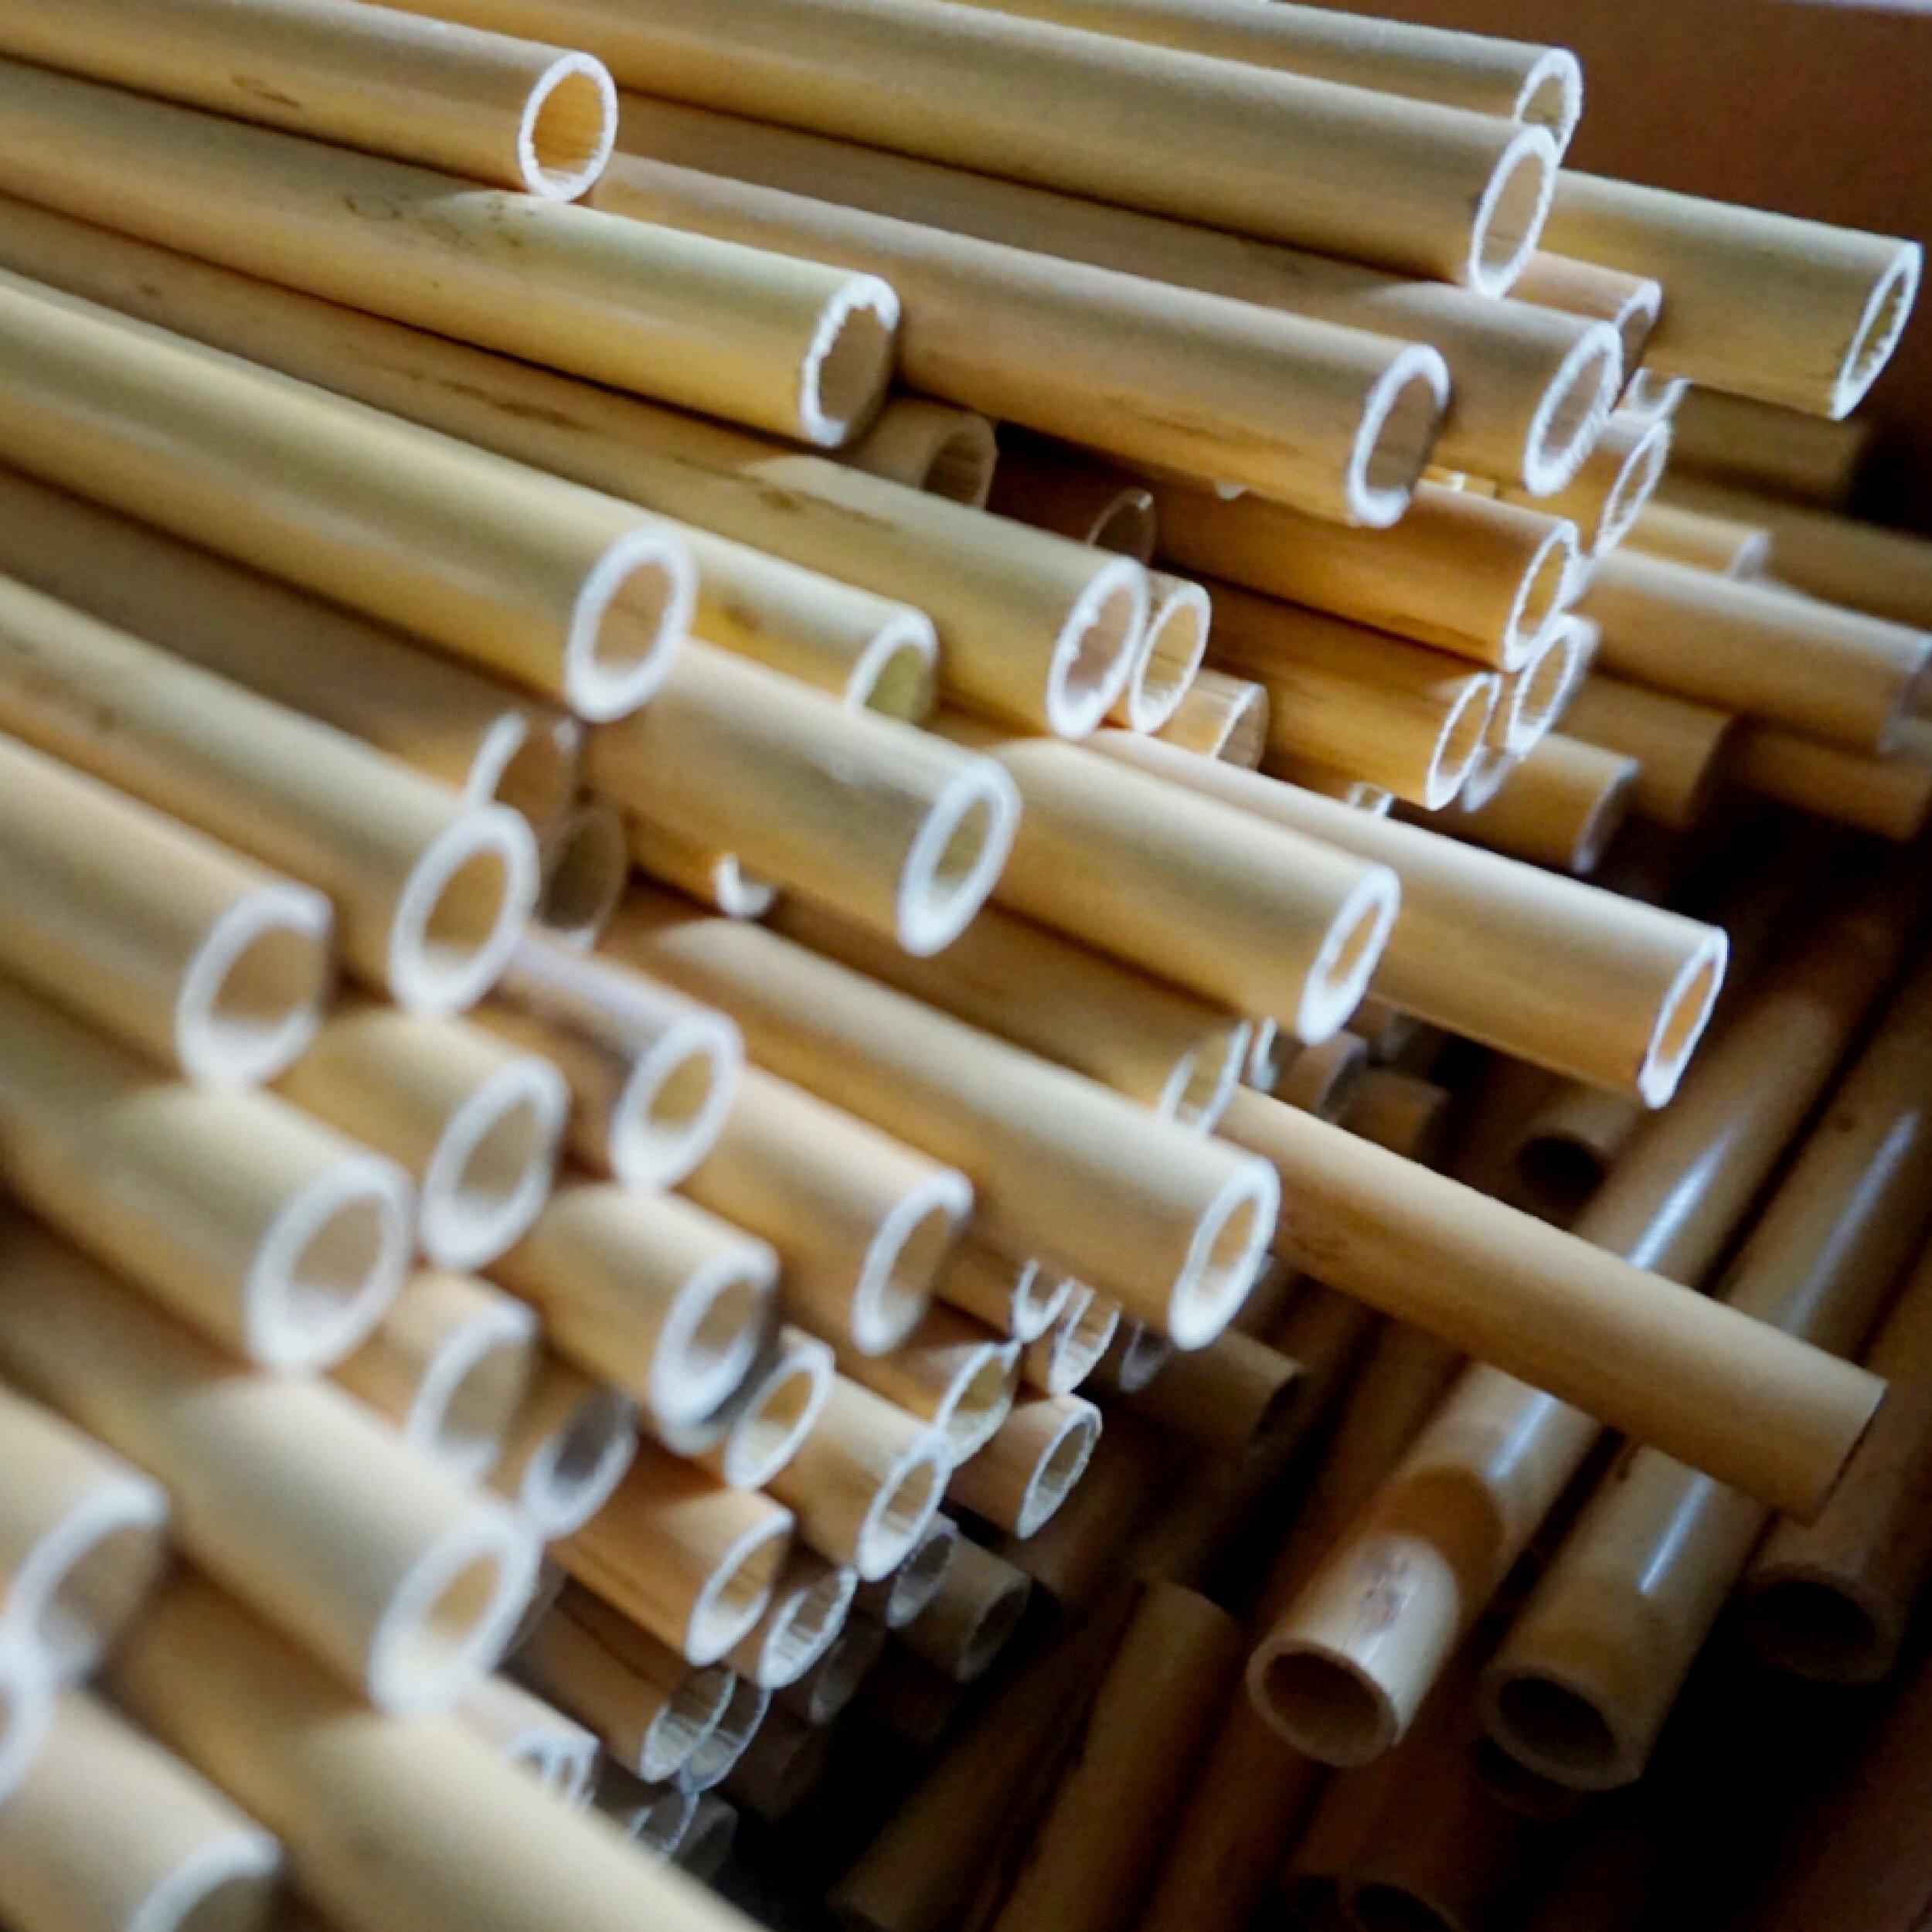 Lavoro oboe tube cane. Oboe tube cane is ready to be made into your best handmade oboe reed